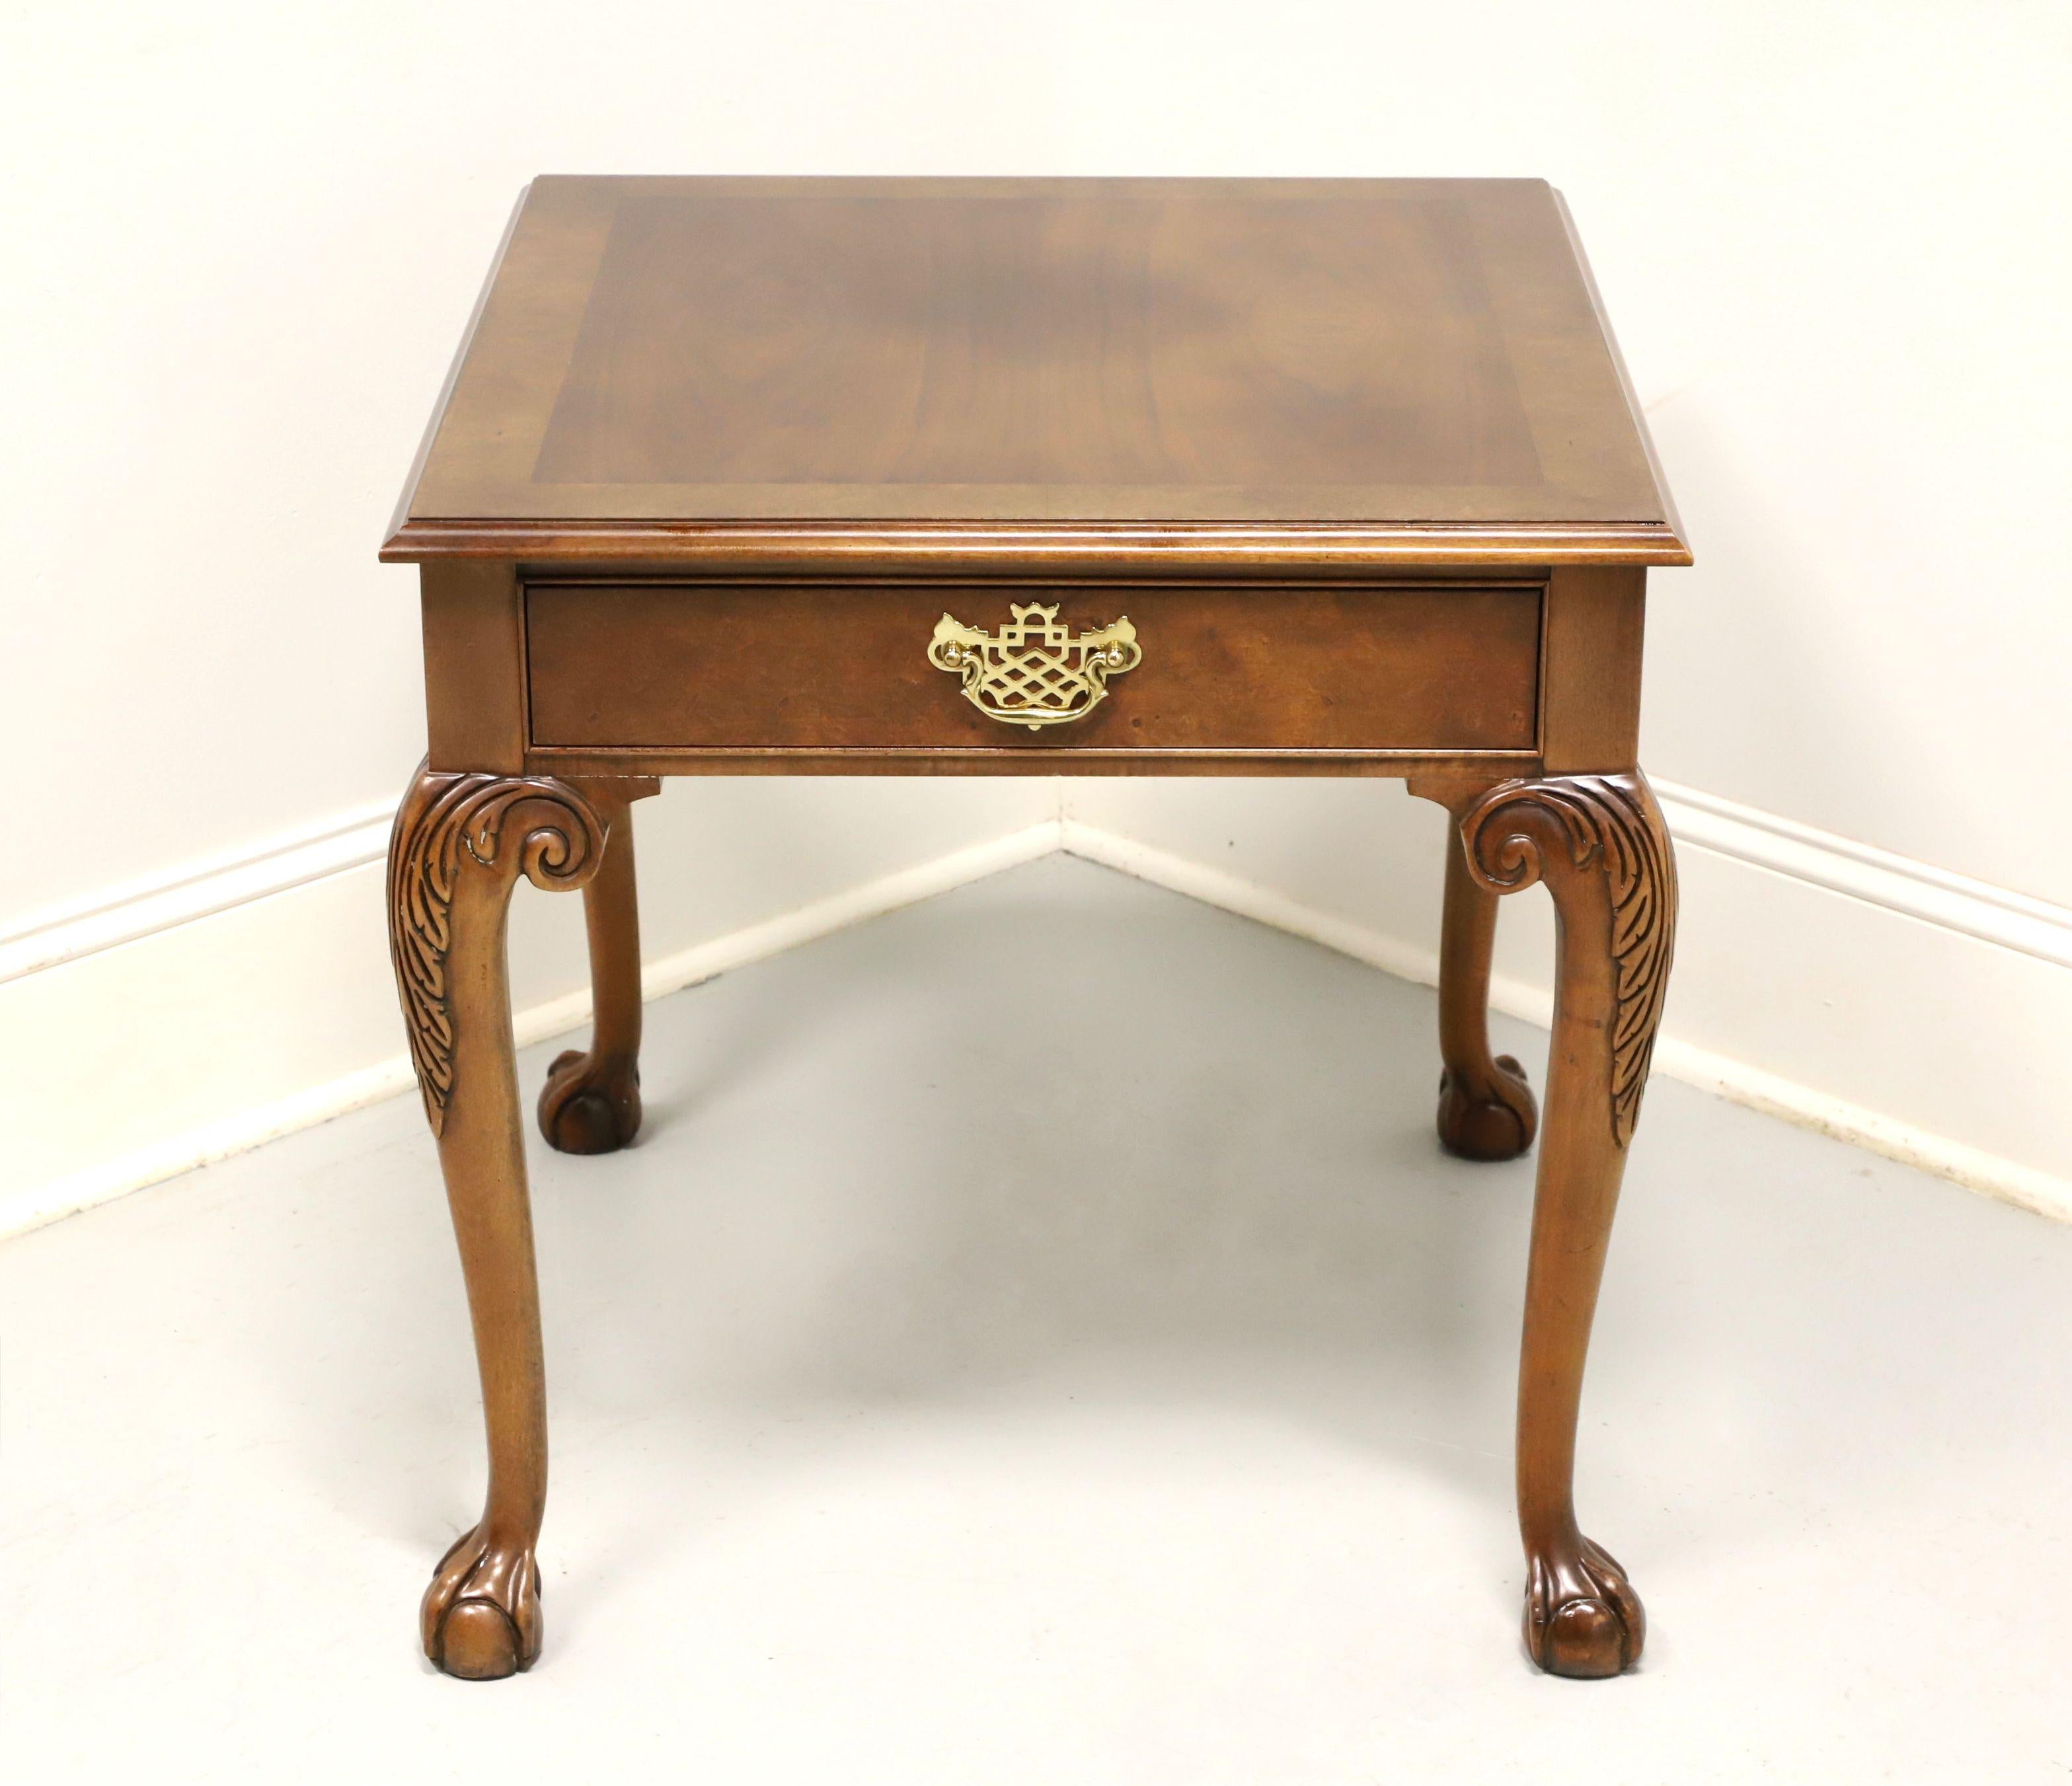 A Chippendale style rectangular side table by Baker Furniture. Solid walnut with burl walnut banded top, brass hardware, carved acanthus leaves to knees, cabriole legs and ball in claw feet. Features one drawer of dovetail construction. Made in